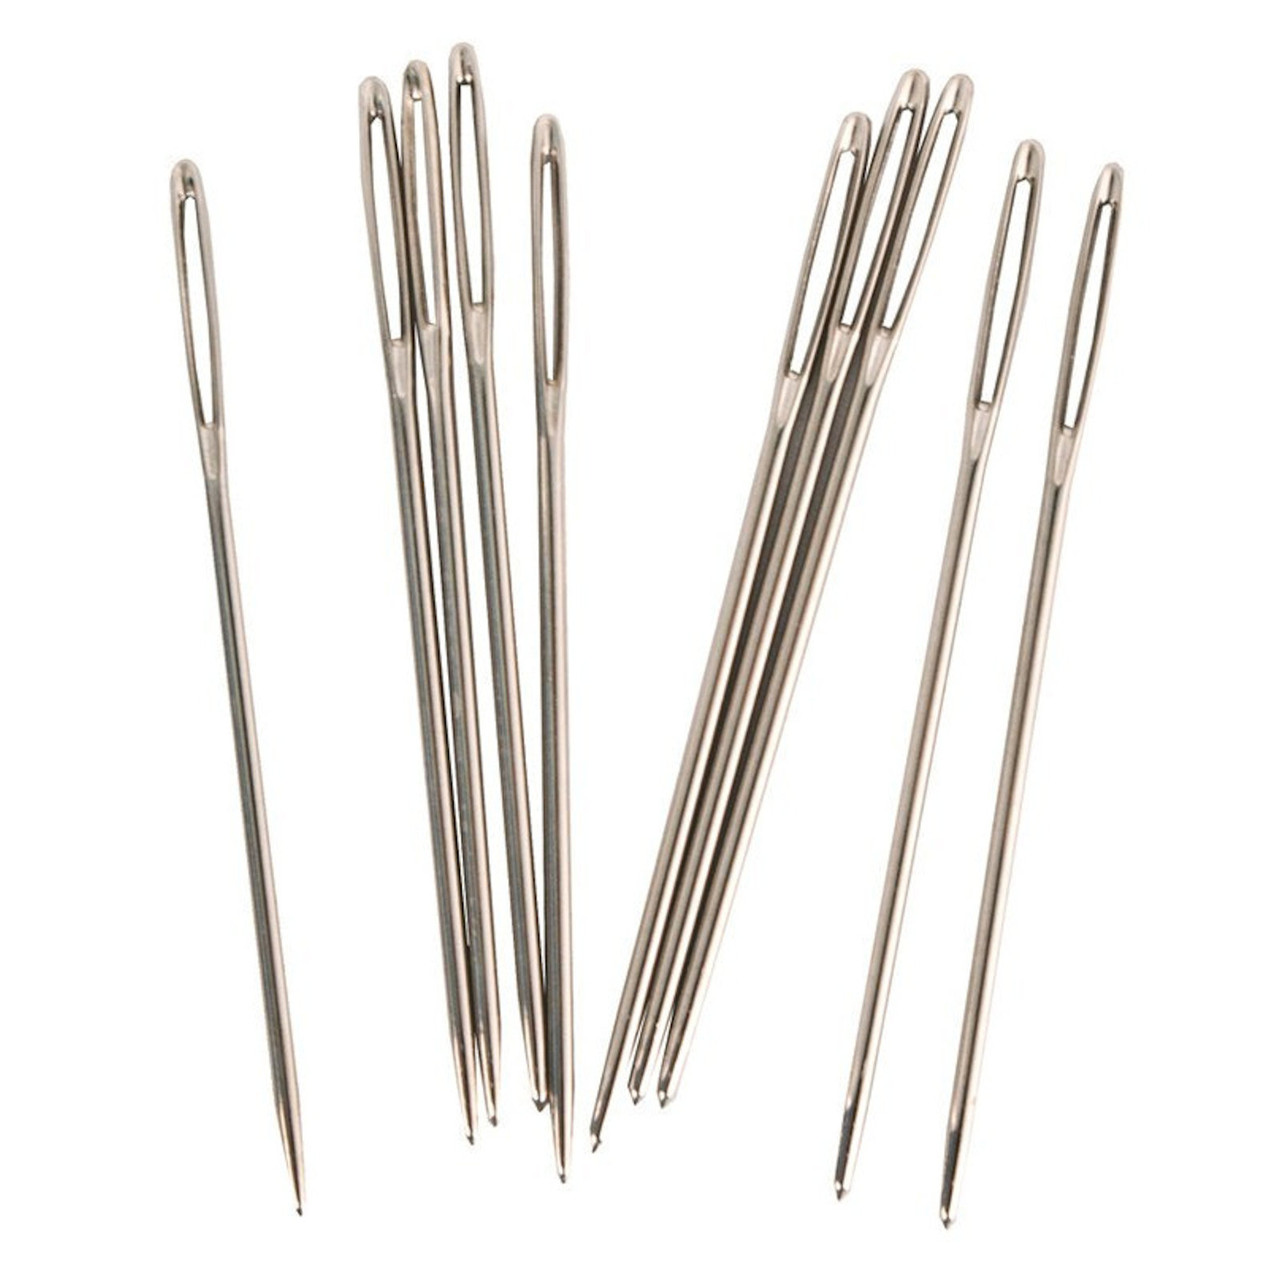 Leather Stitching Needles - 10 Pack